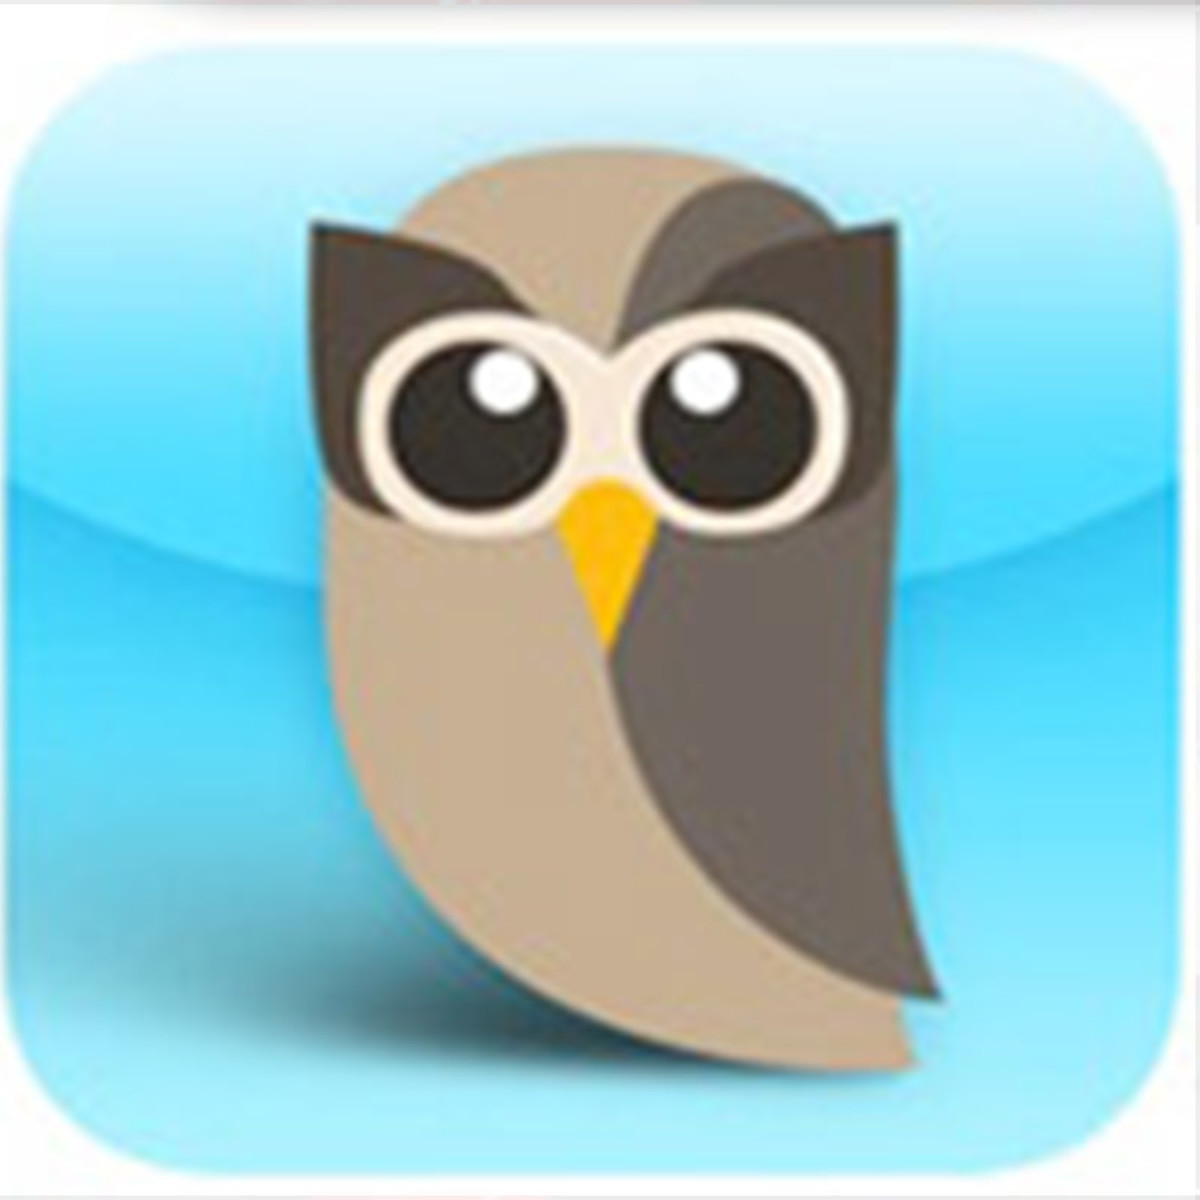 Hootsuite is a third party App that allows you to update the status of your social networks (Twitter, Facebook, etc.). Great for real-time engagement with your online communities